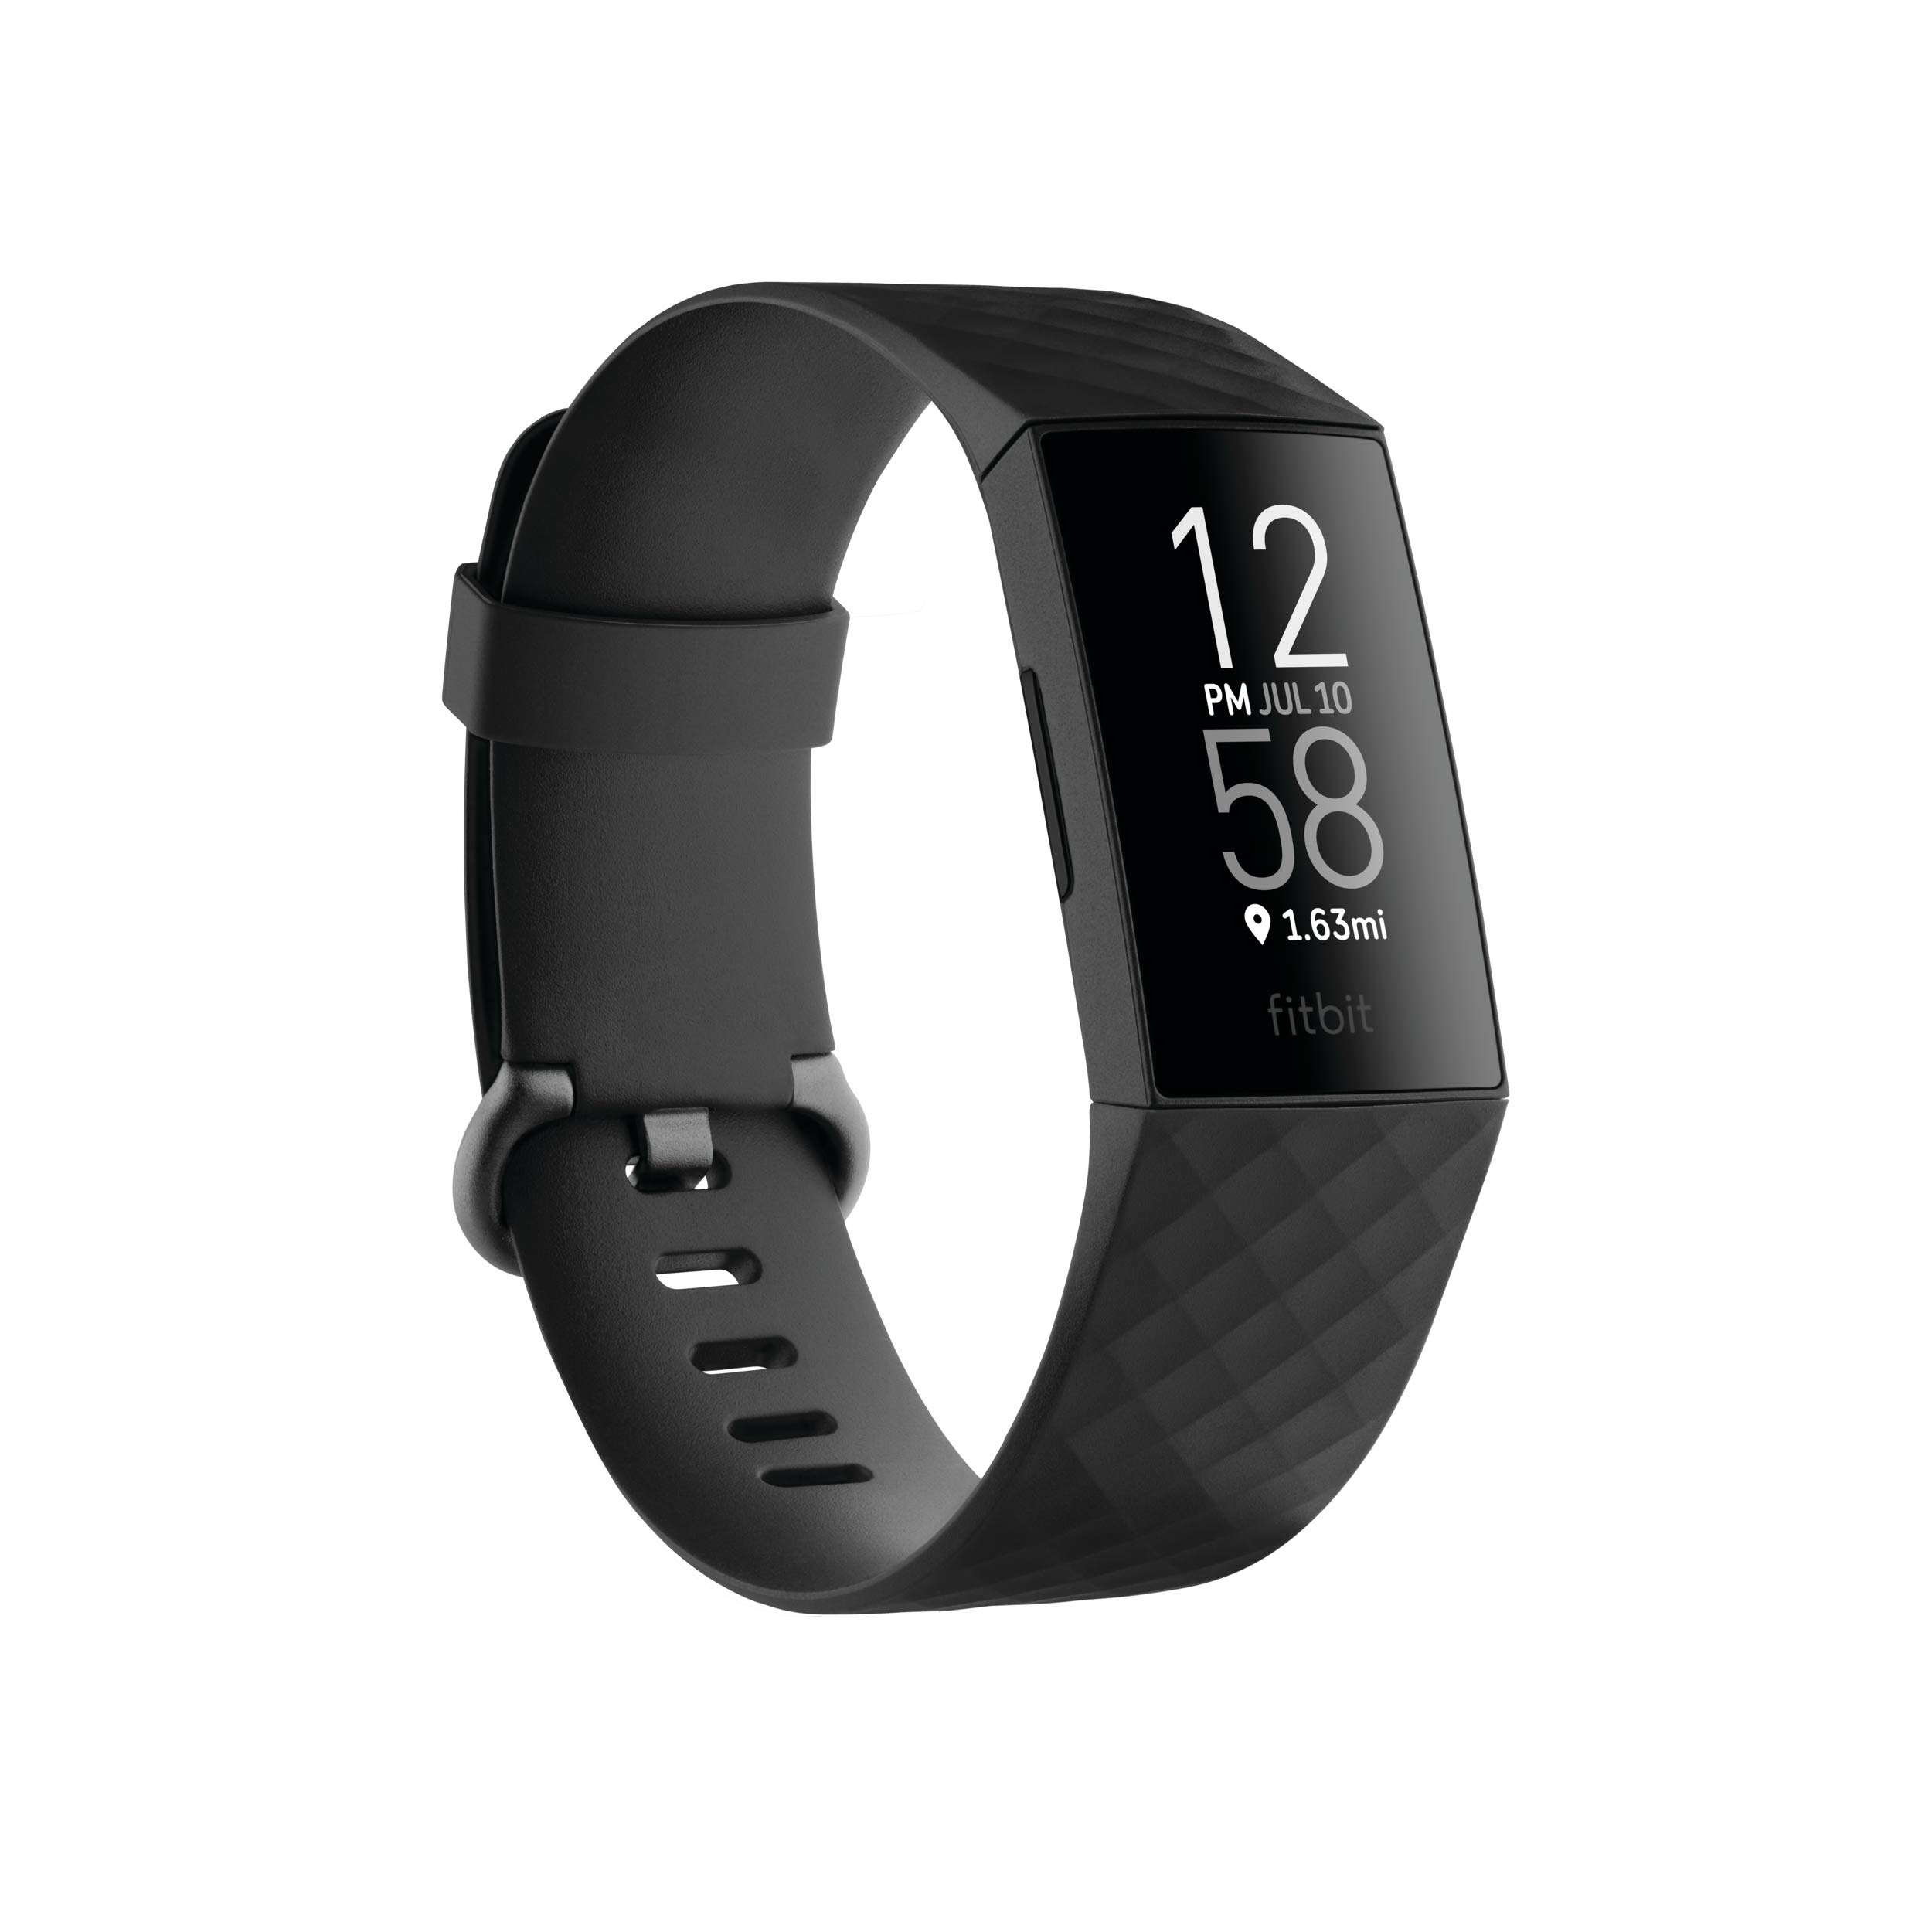 Fitbit charge 4 Fitness and Activity Tracker with Built-in gPS, Heart Rate, Sleep & Swim Tracking, BlackBlack, One Size (S &L Ba